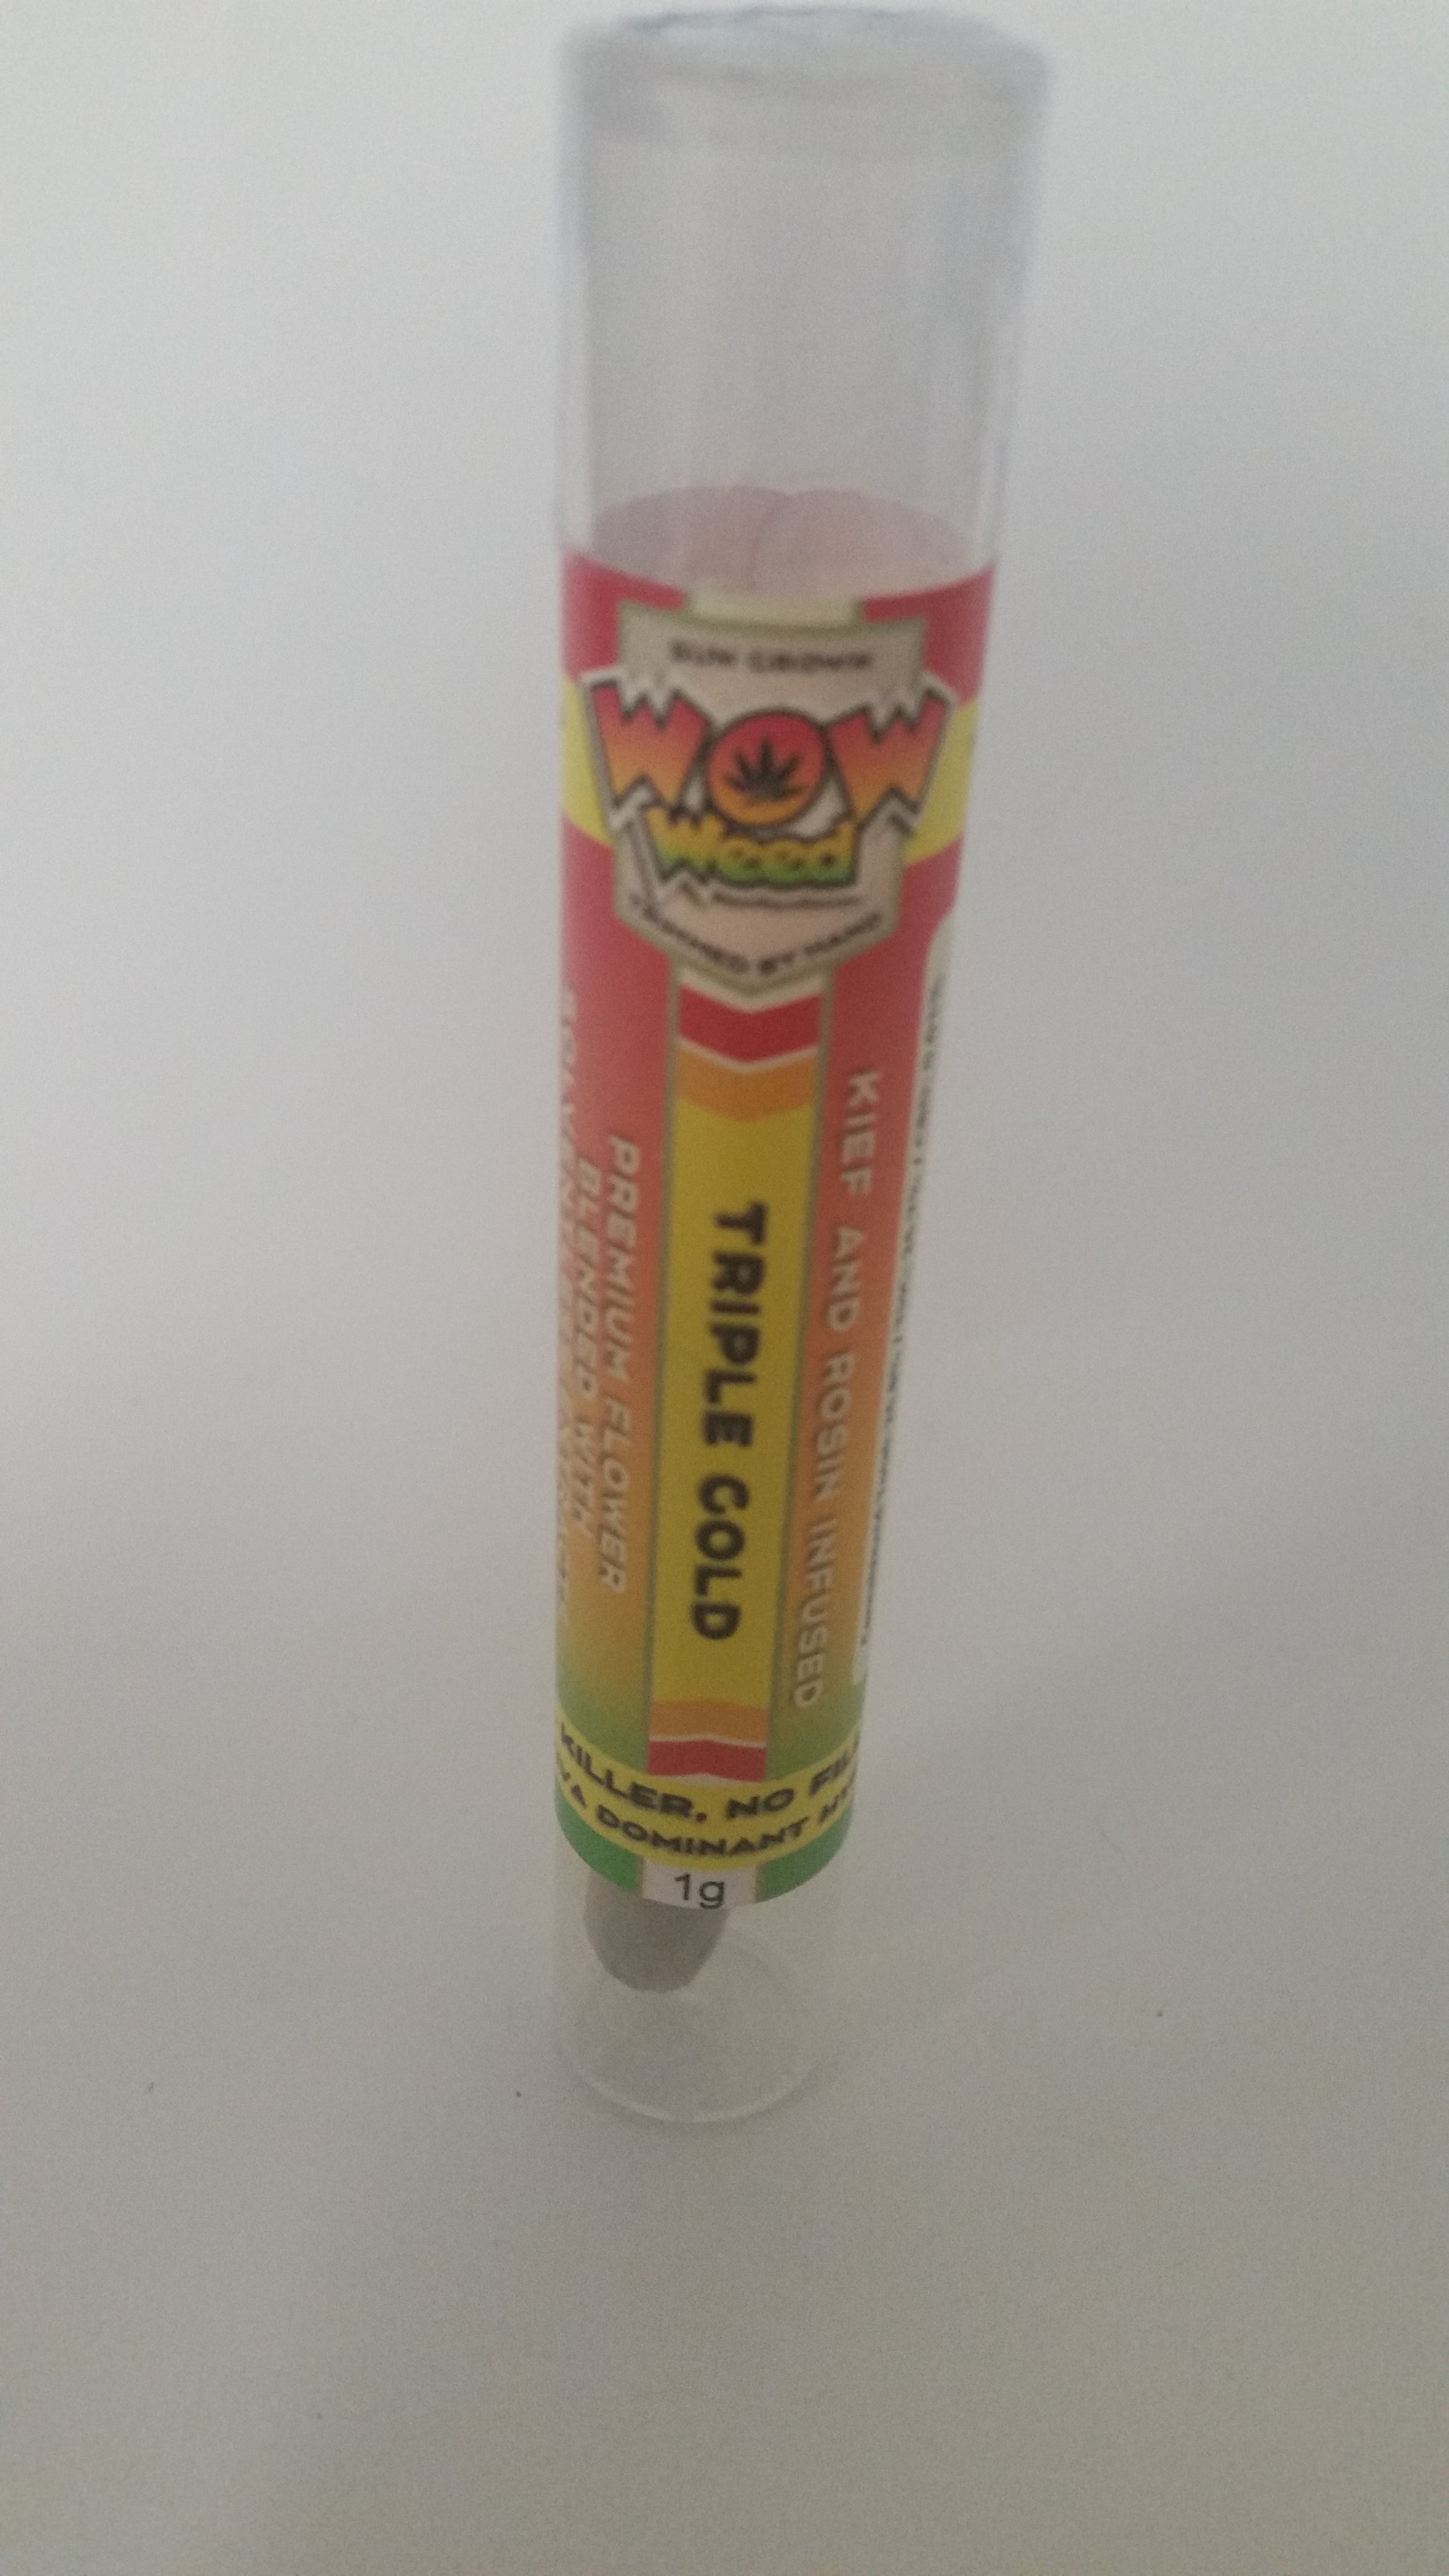 marijuana-dispensaries-530-7th-ave-suite-d-longview-triple-gold-2-x-5g-infused-pre-roll-by-wow-weed